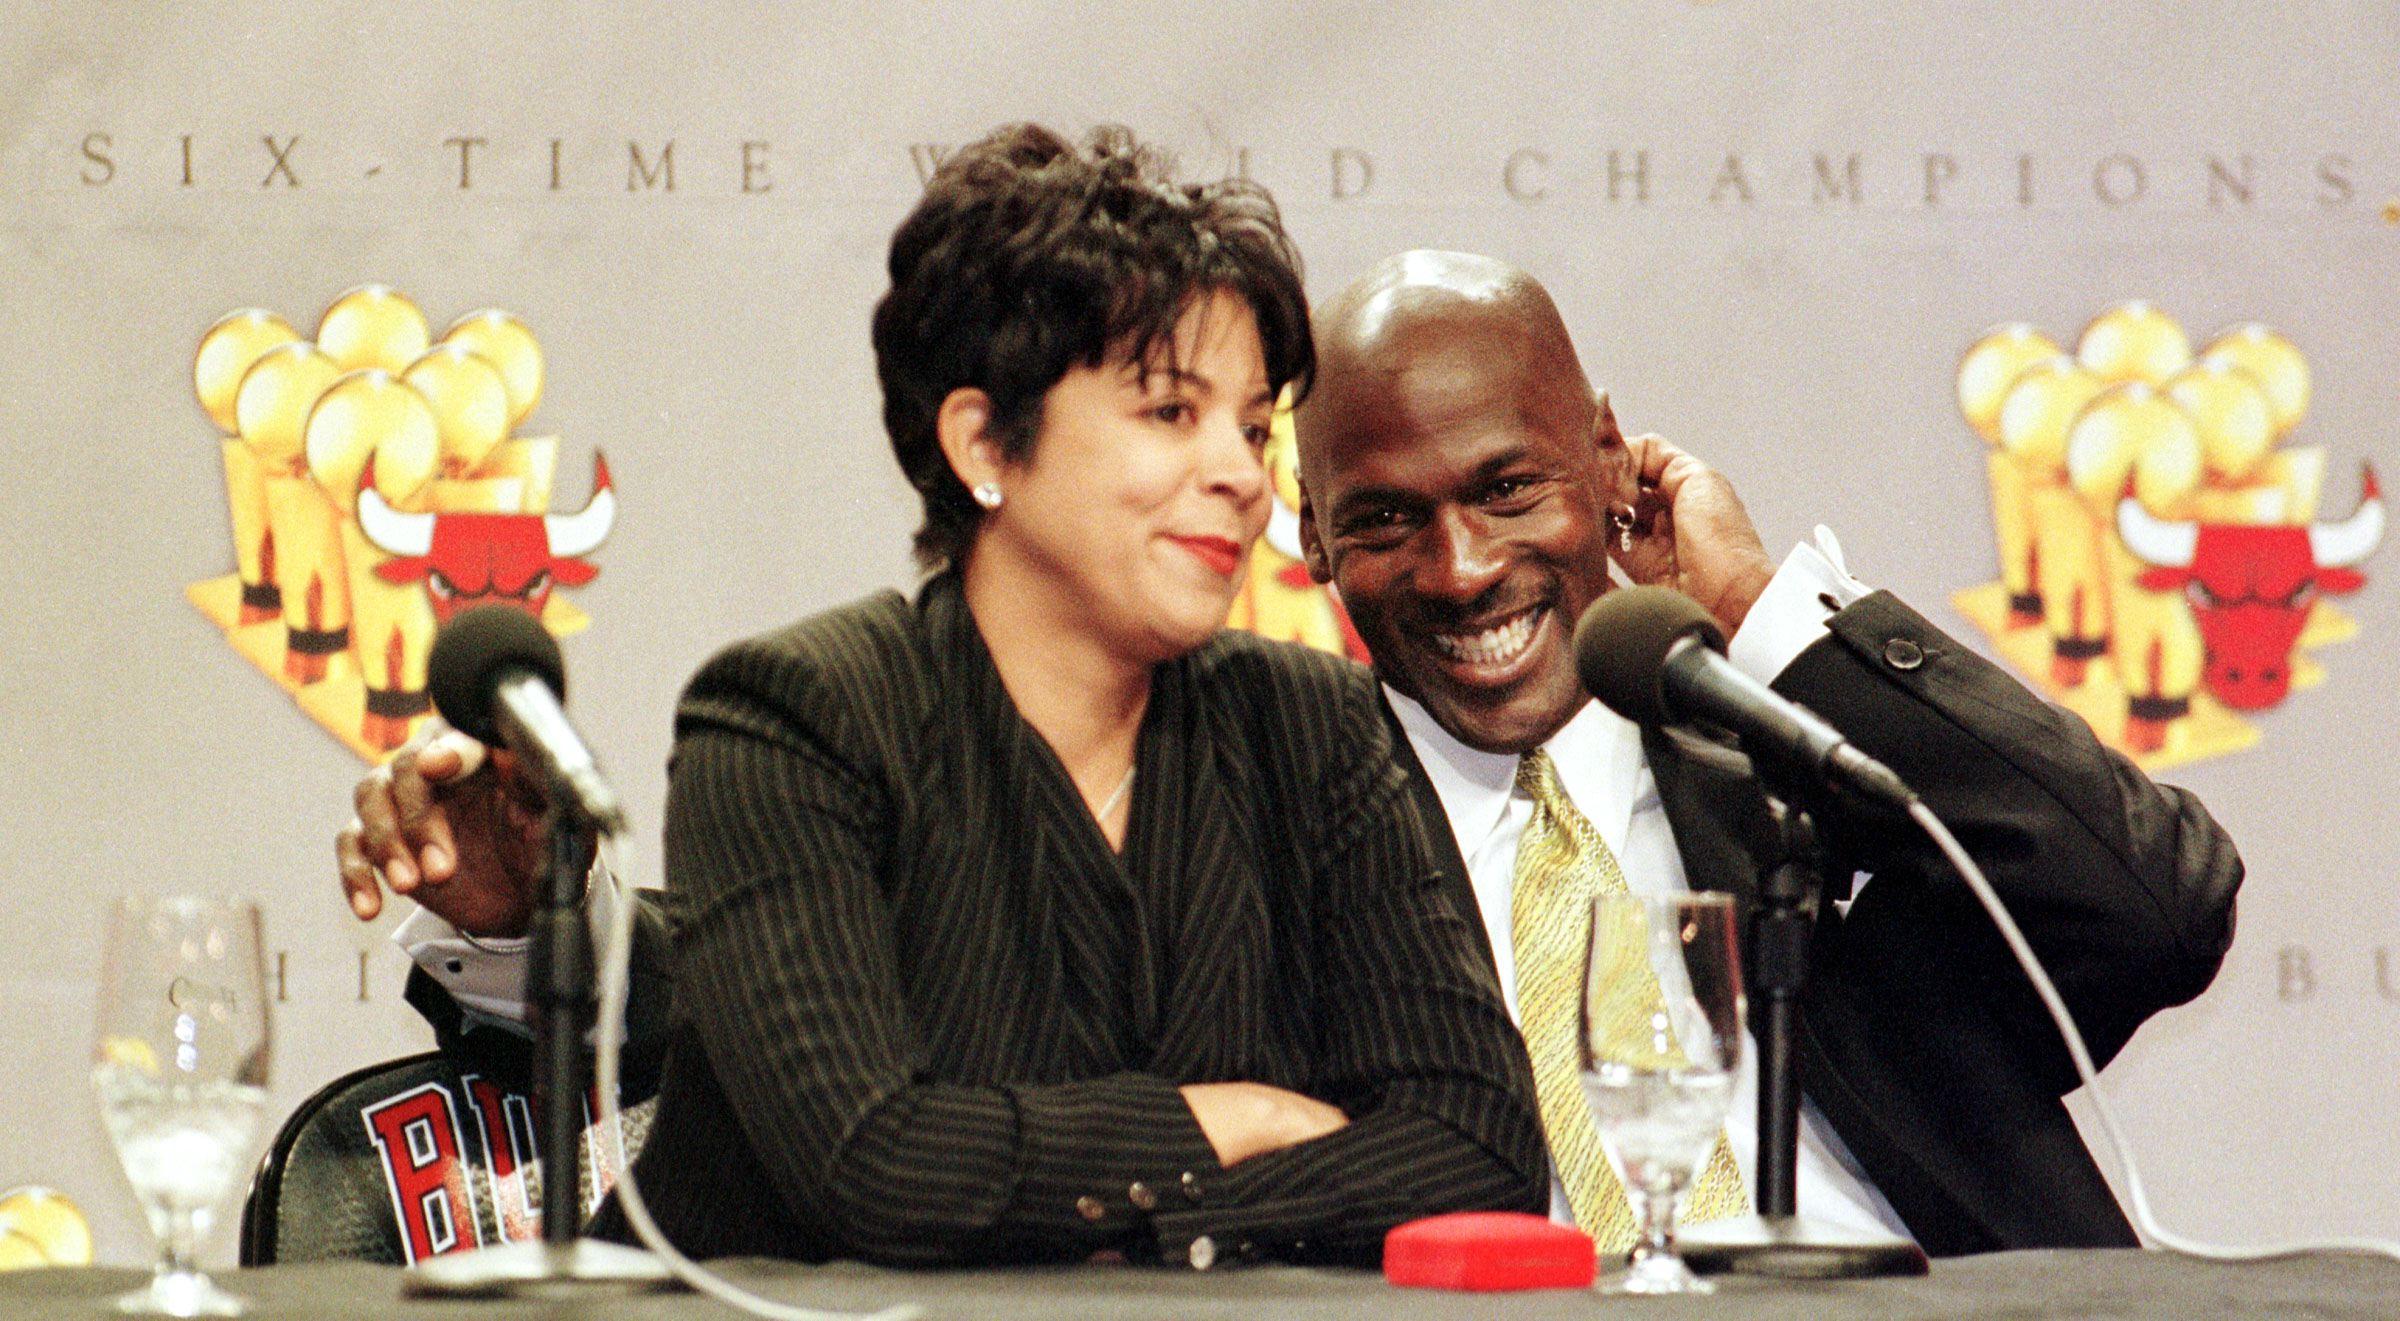 Michael Jordan and Juanita Vanoy at a press conference on January 13, 1999 in Chicago | Source: Getty Images